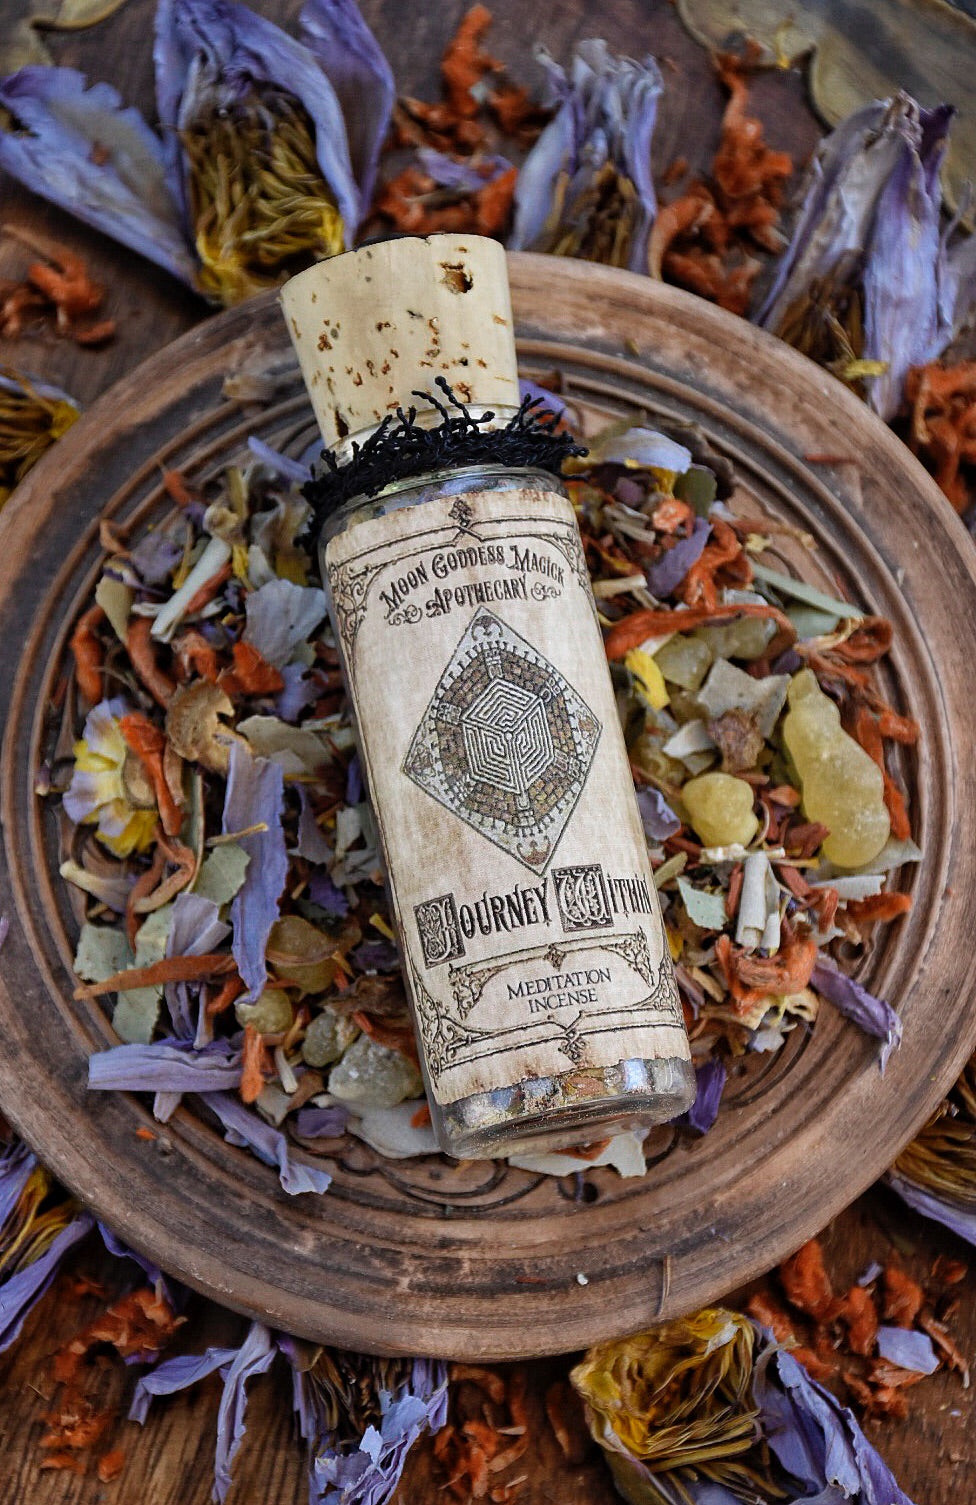 Journey Within /// A Sacred Meditation Incense for the Discovery of One's Path and Purpose /// 1oz Loose Incense Blend - Moon Goddess Magick Apothecary 